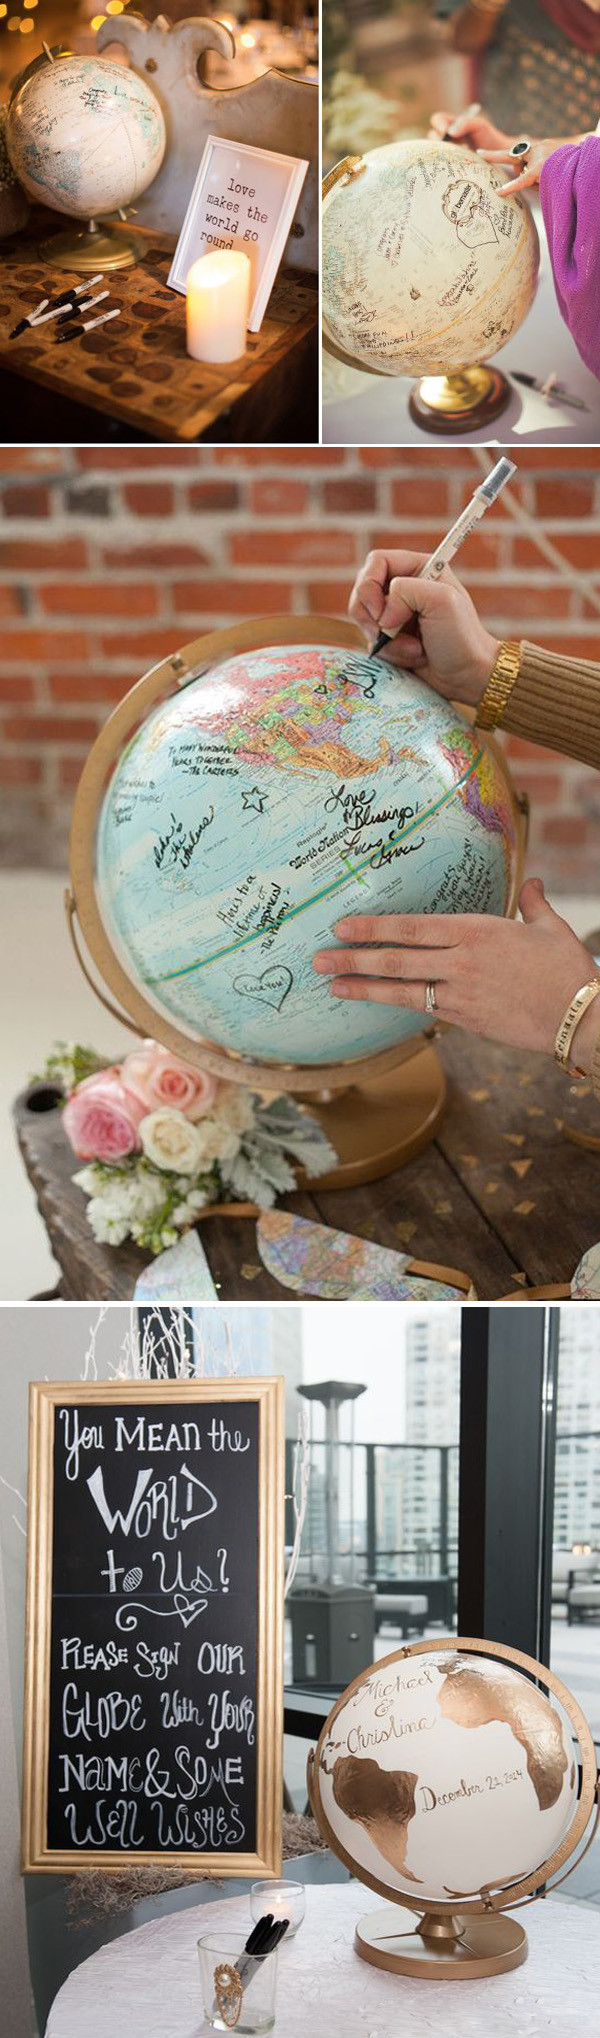 Cool Wedding Guest Books
 The 12 Most Creative Guest Book Ideas for Your Wedding